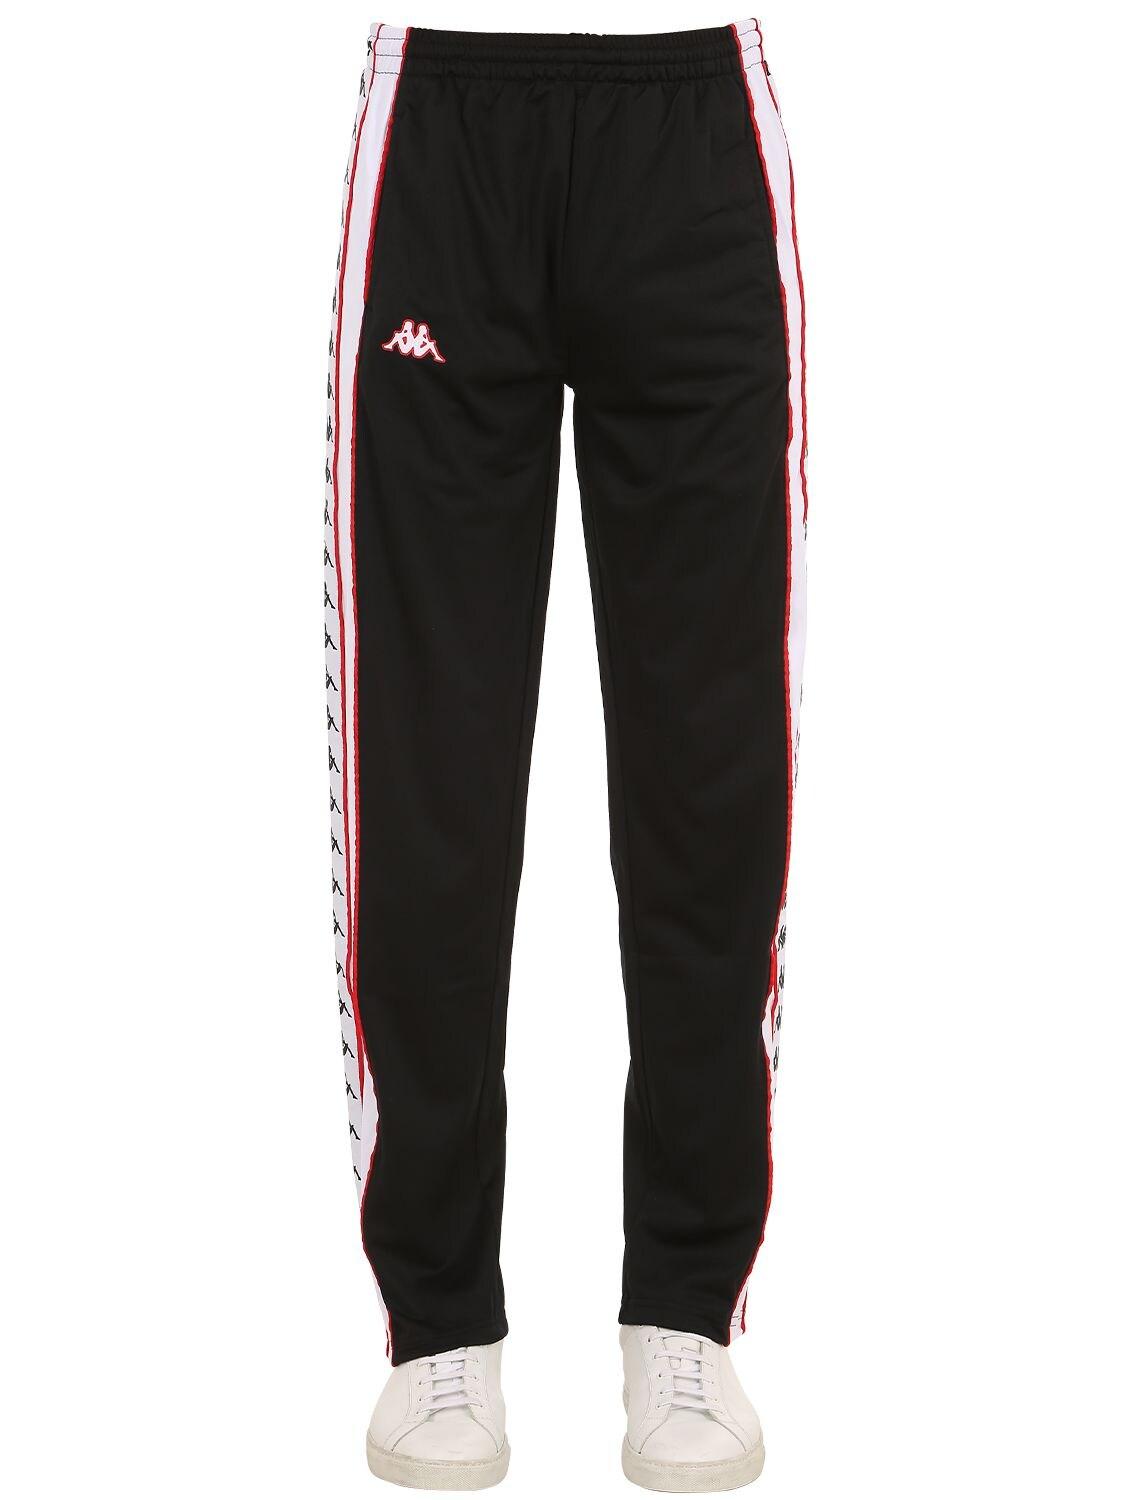 Kappa Track Pants W/ Snap Button Side Bands in Black for Men - Lyst